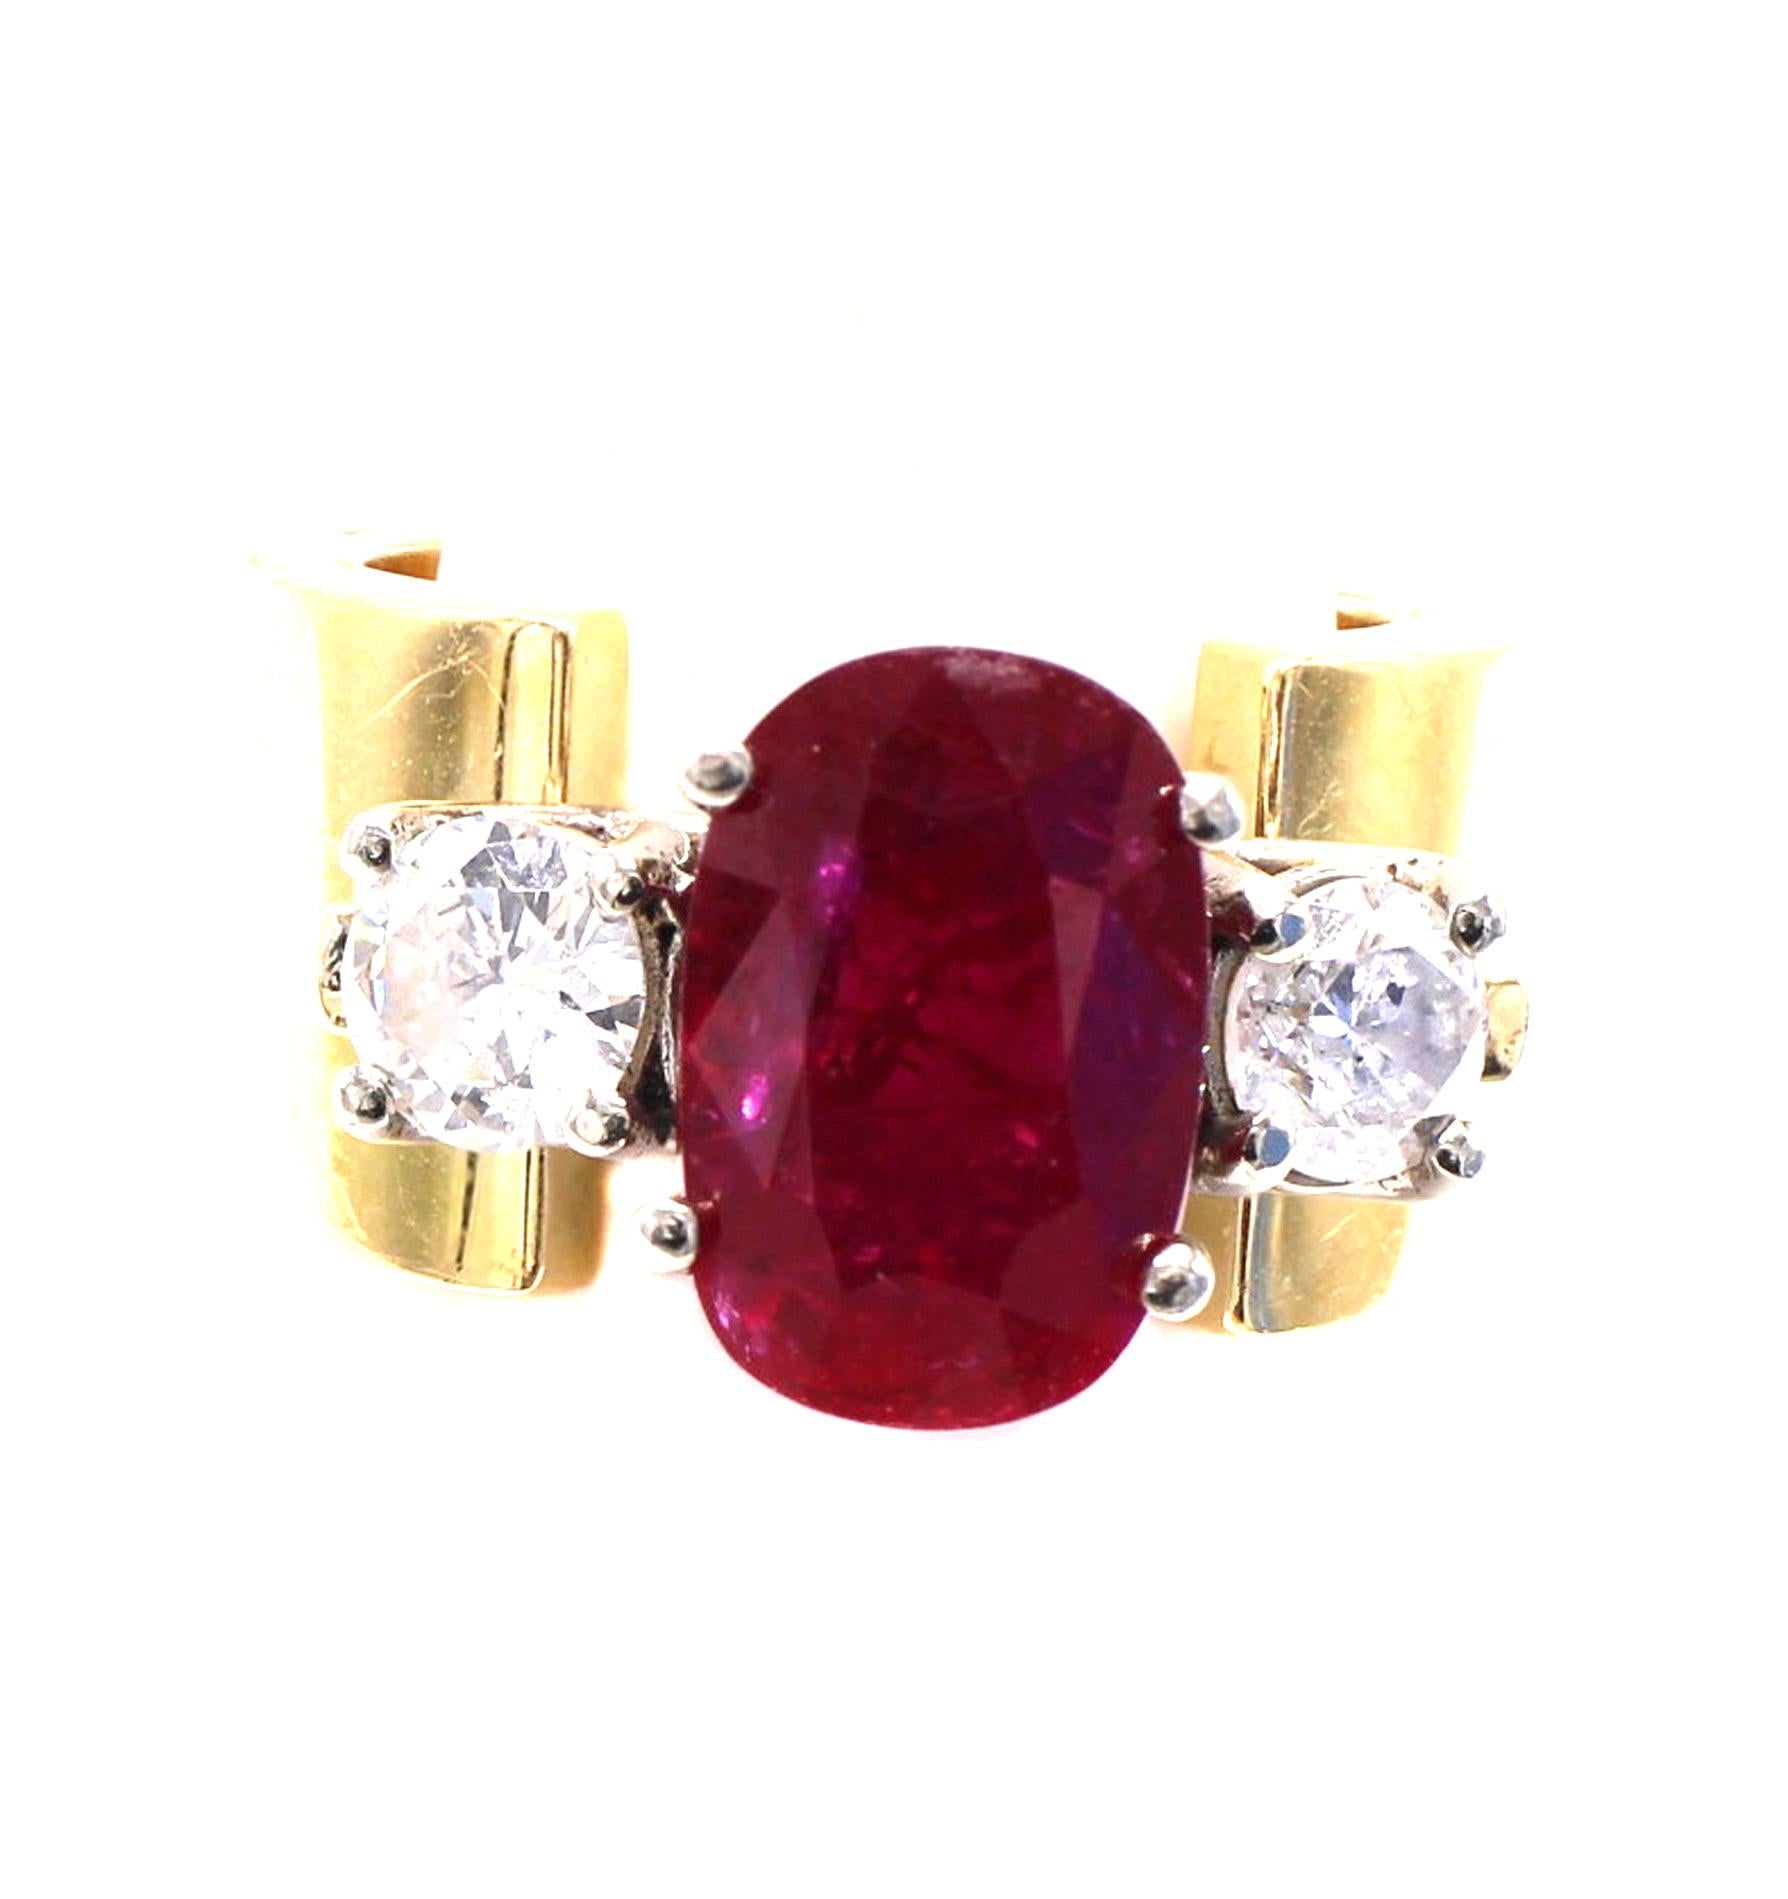 Designed and created by one of the most renown fashion houses in the world, this unique ring is a pure statement on the finger. The wide 18 karat yellow gold band is crowned by an oval pigeon blood red ruby weighing 4.08 carats and accompanied by a